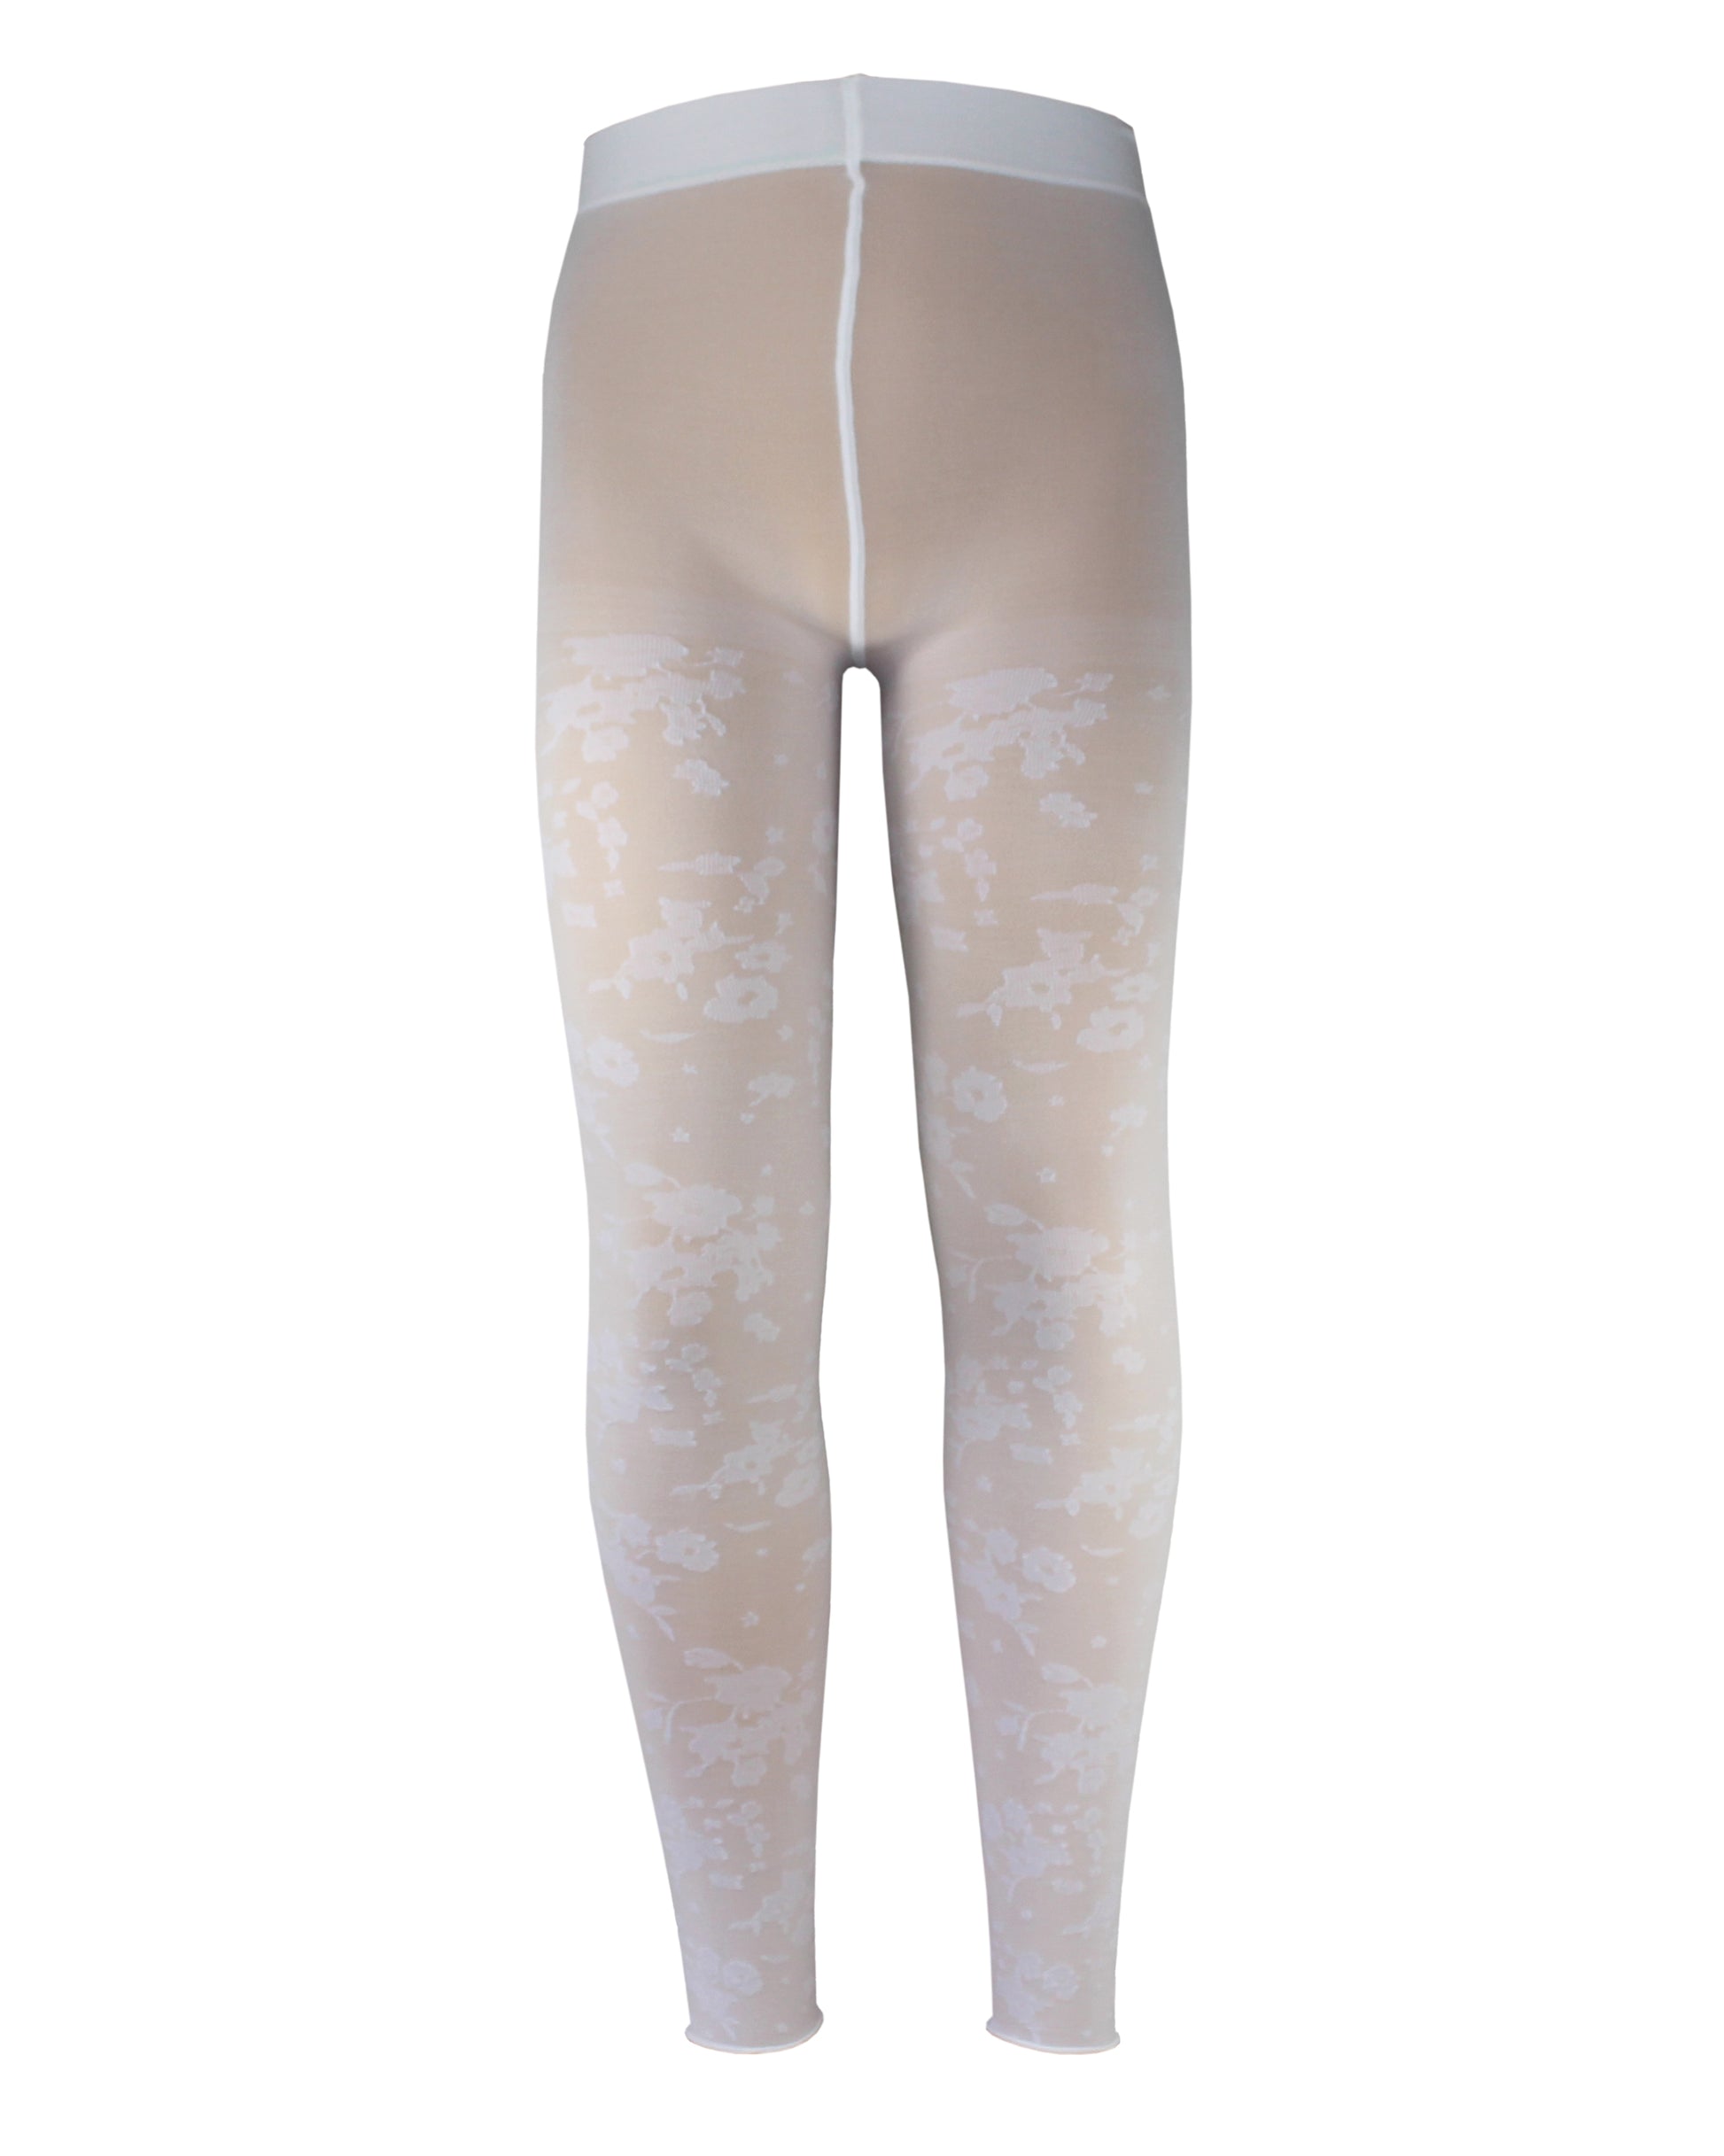 Omsa Lavanda Leggings - Soft white semi opaque kid's footless tights with a woven floral pattern and soft roll cuff edge.